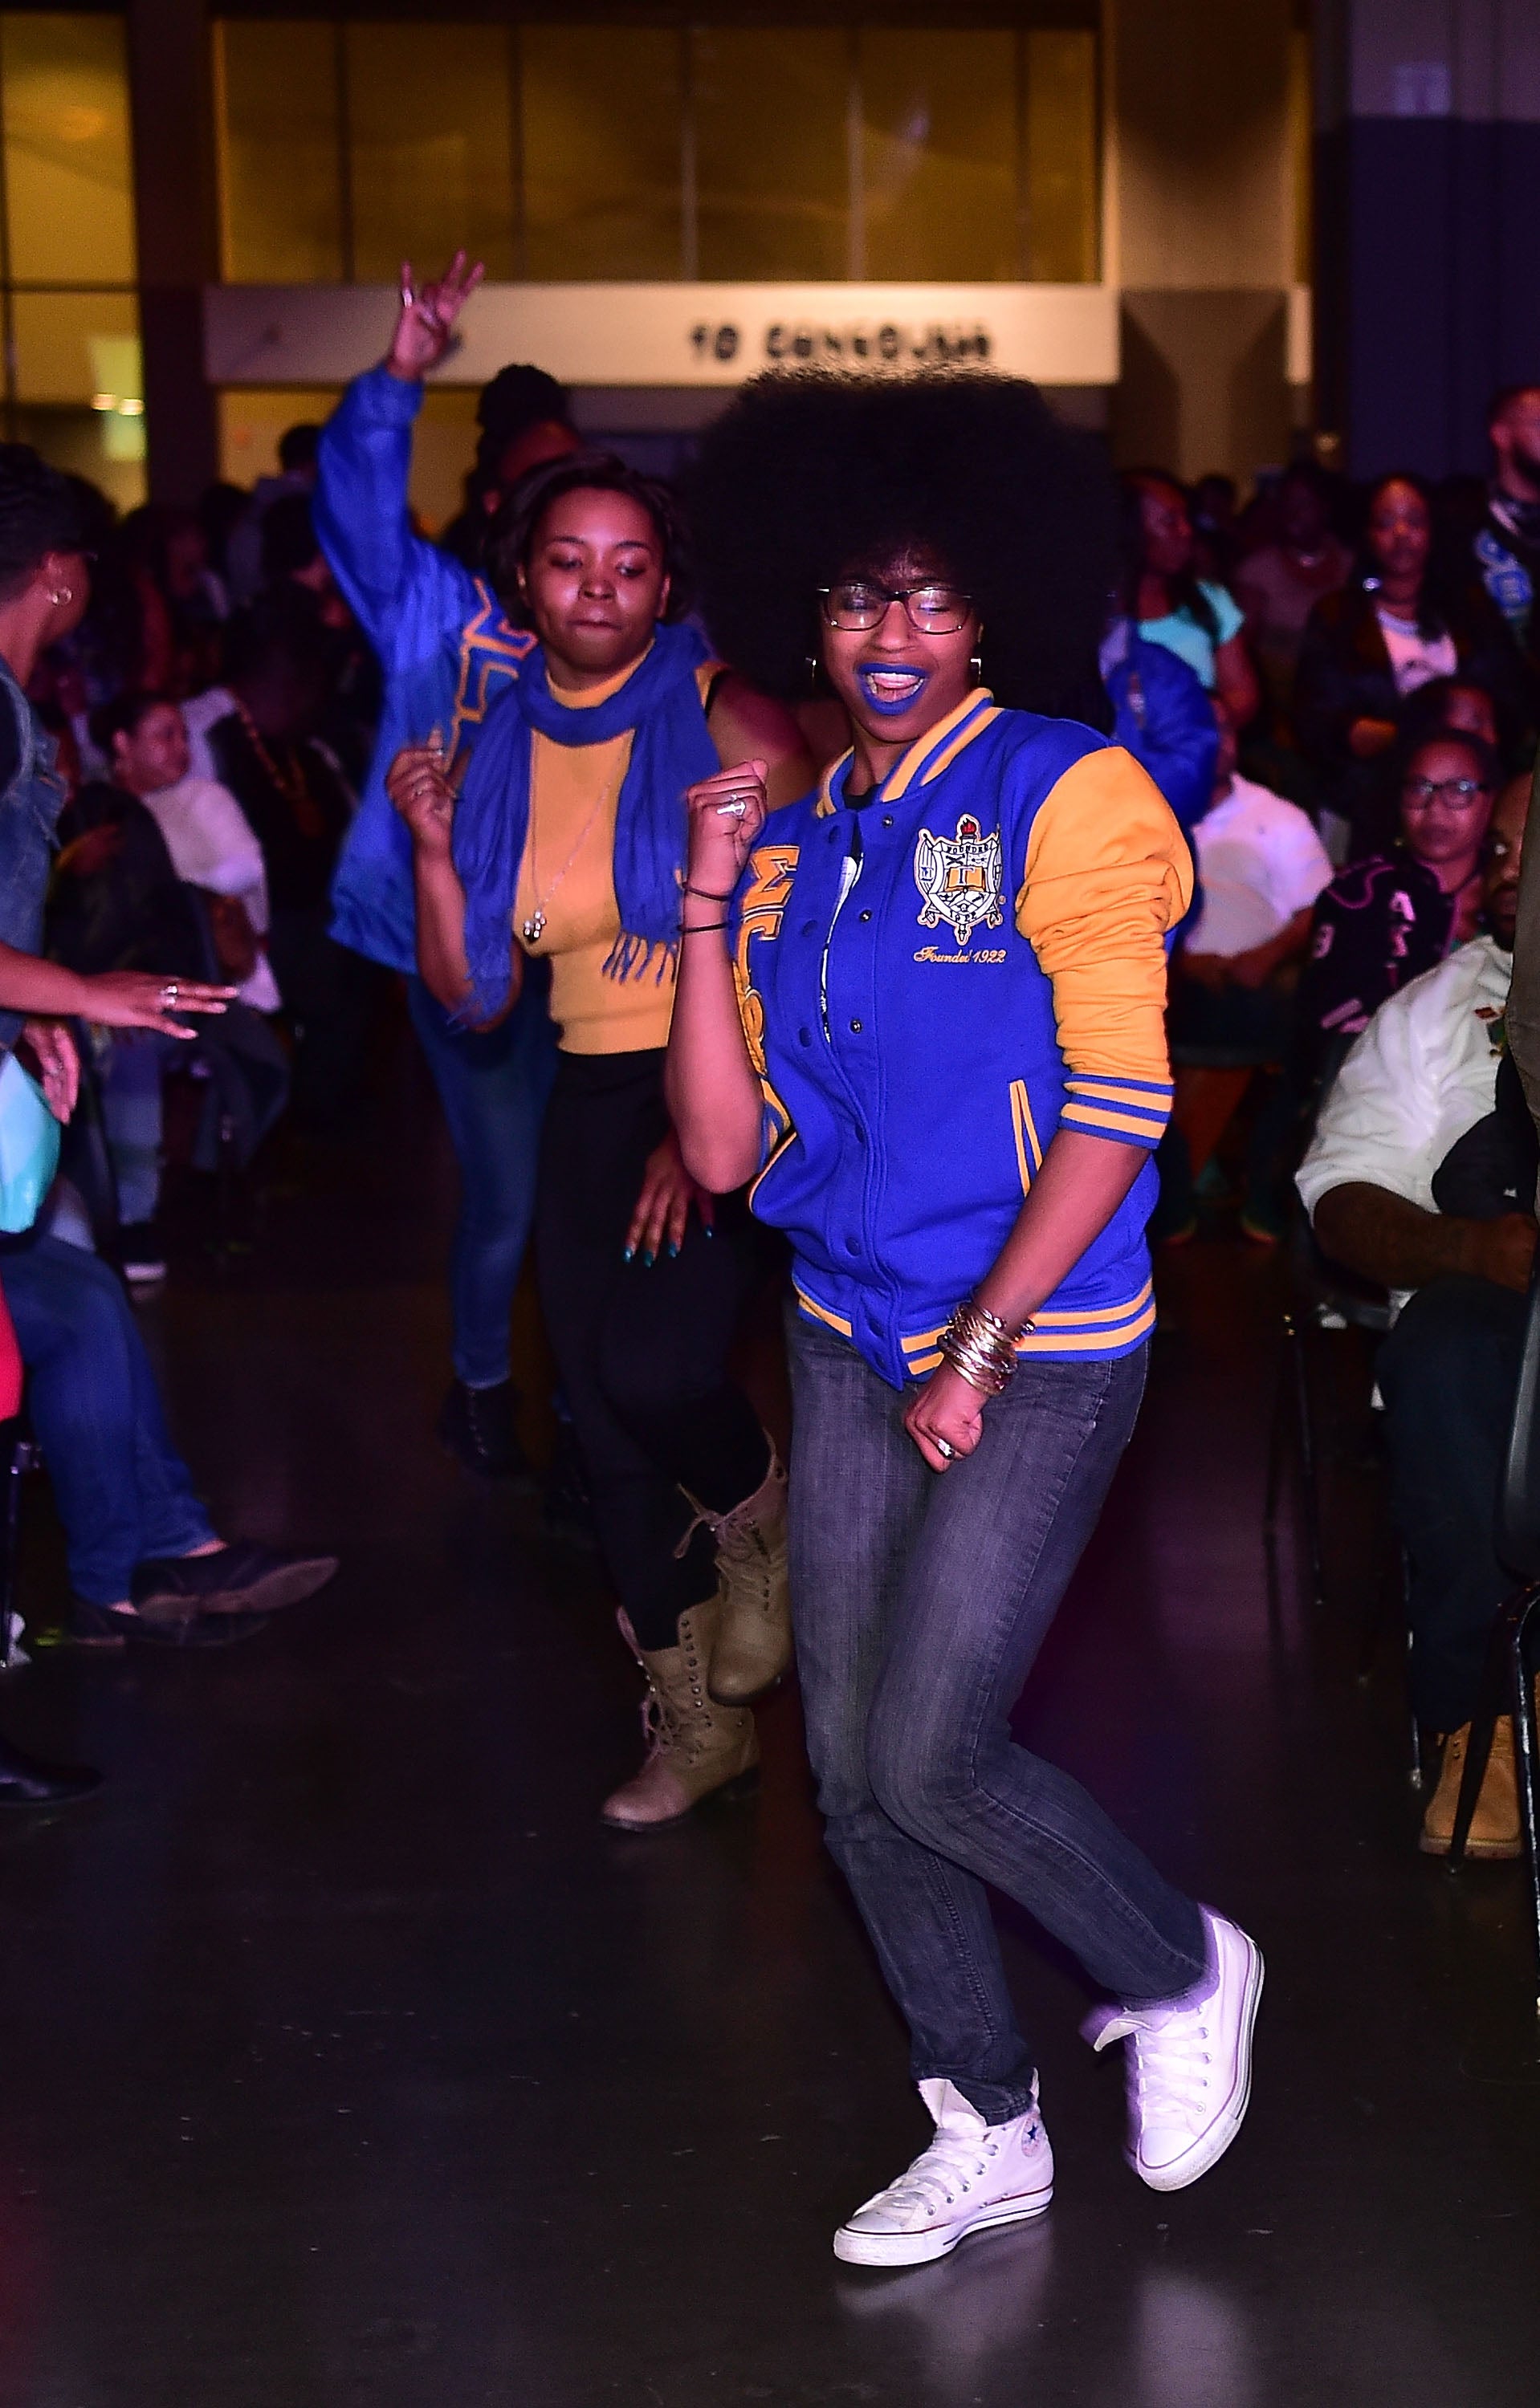 These Images of Black Sororities and Fraternities Stepping Show The True Beauty of the Artform
